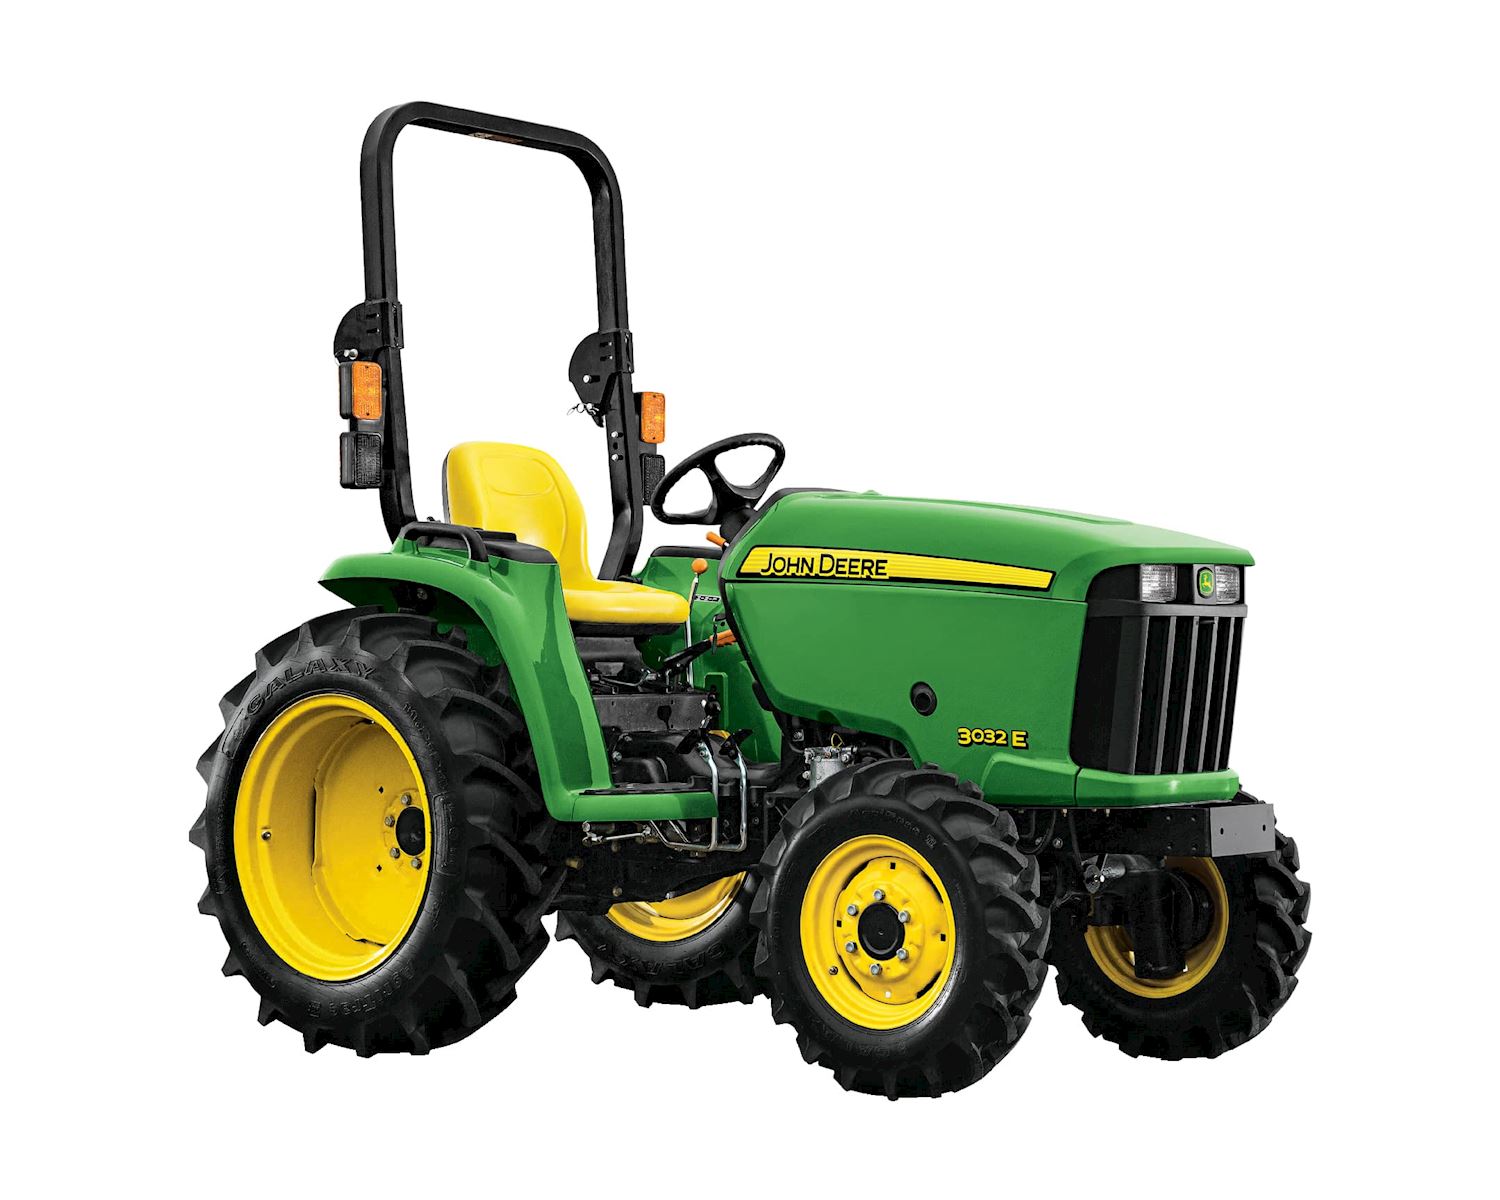 Model Year 2024 3032E Compact Utility Tractor